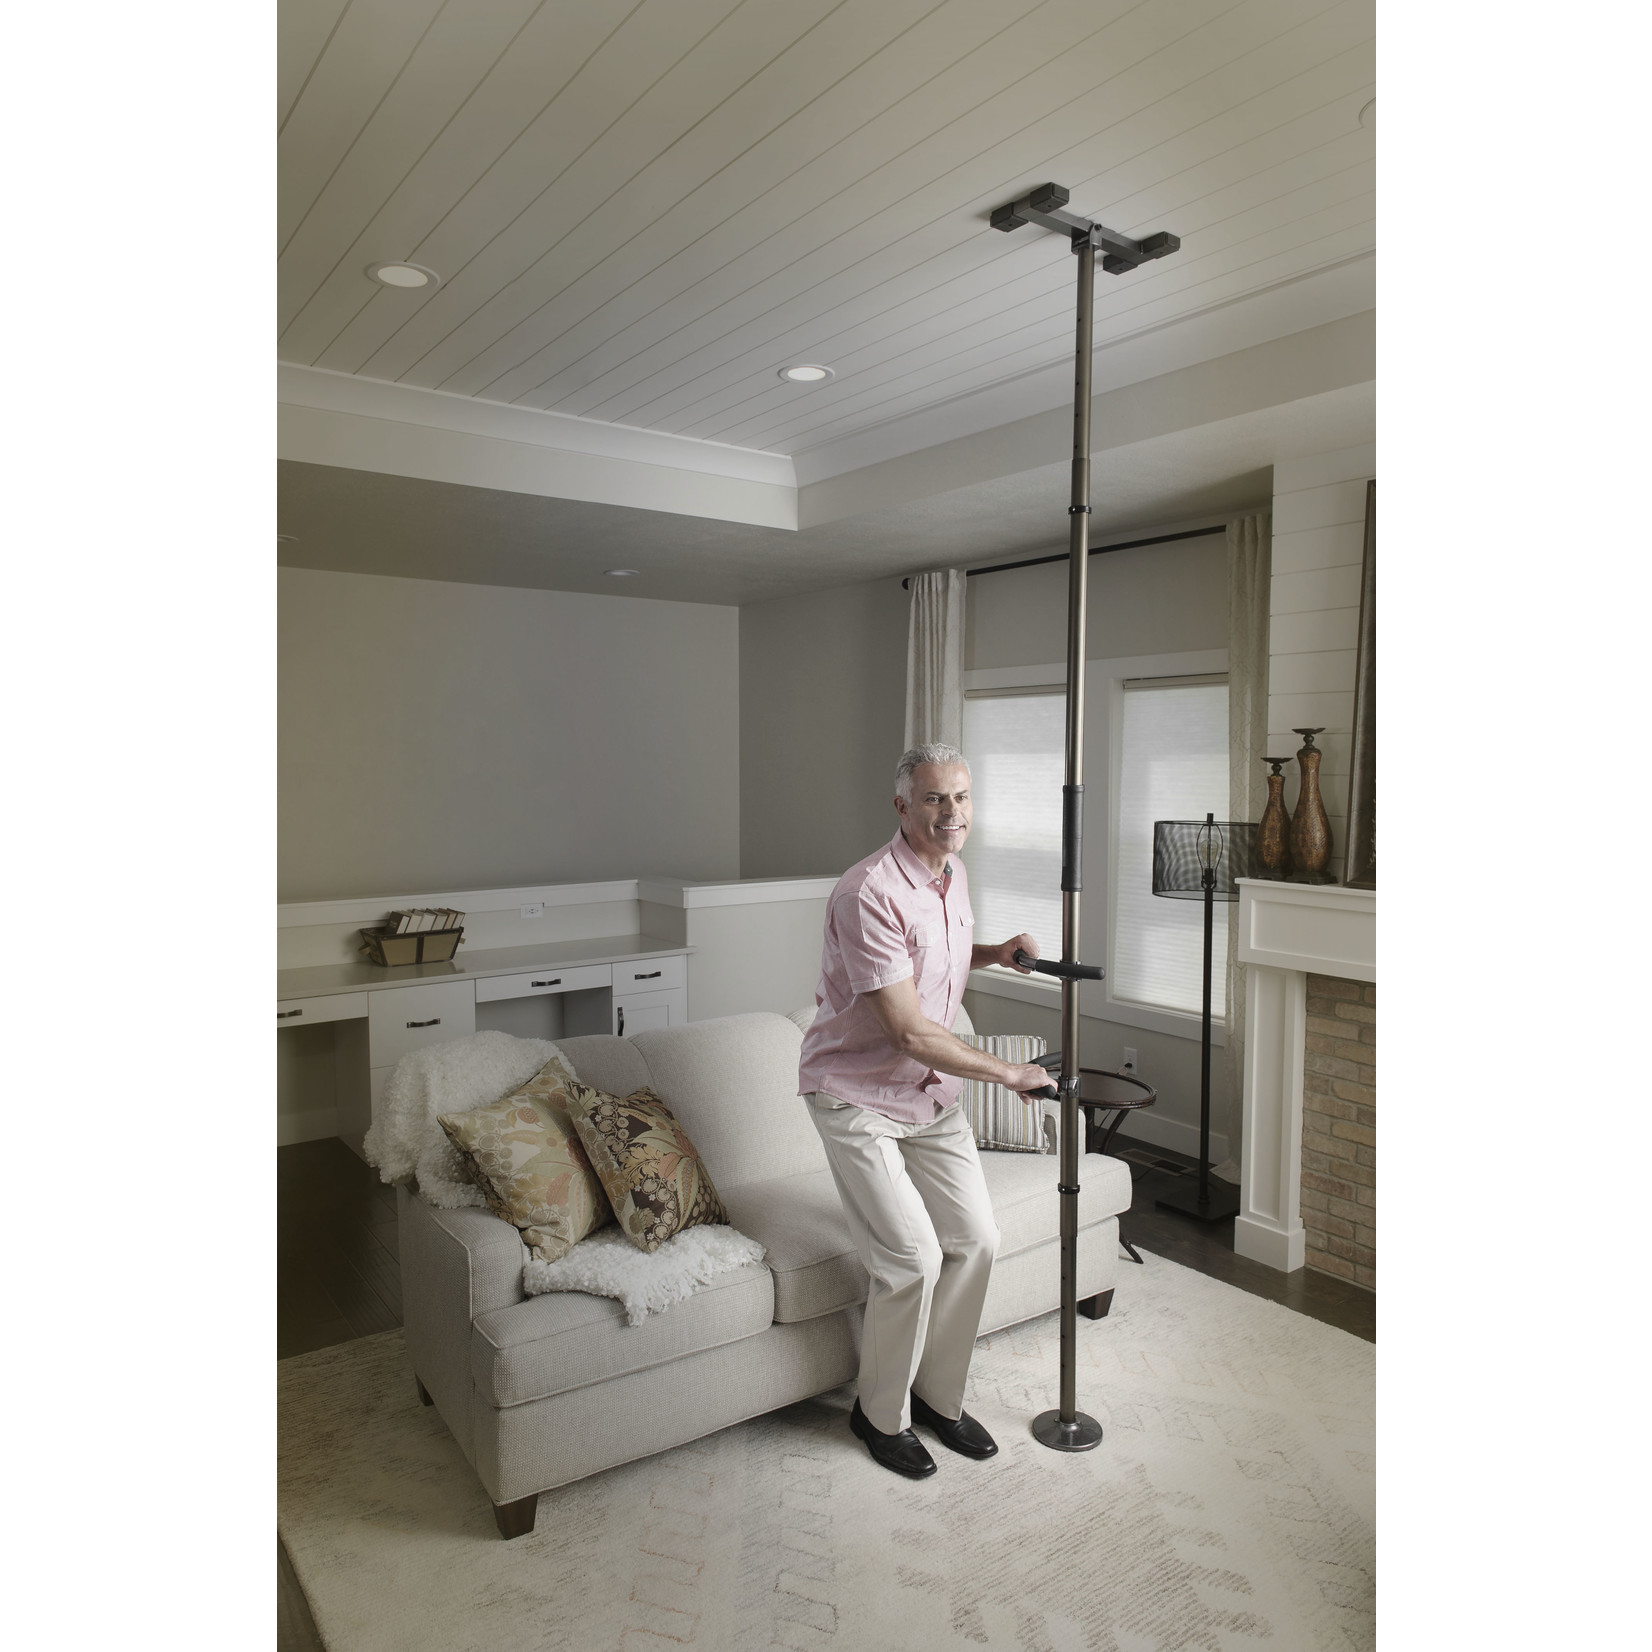 Signature Life Sure Stand Pole with Handles